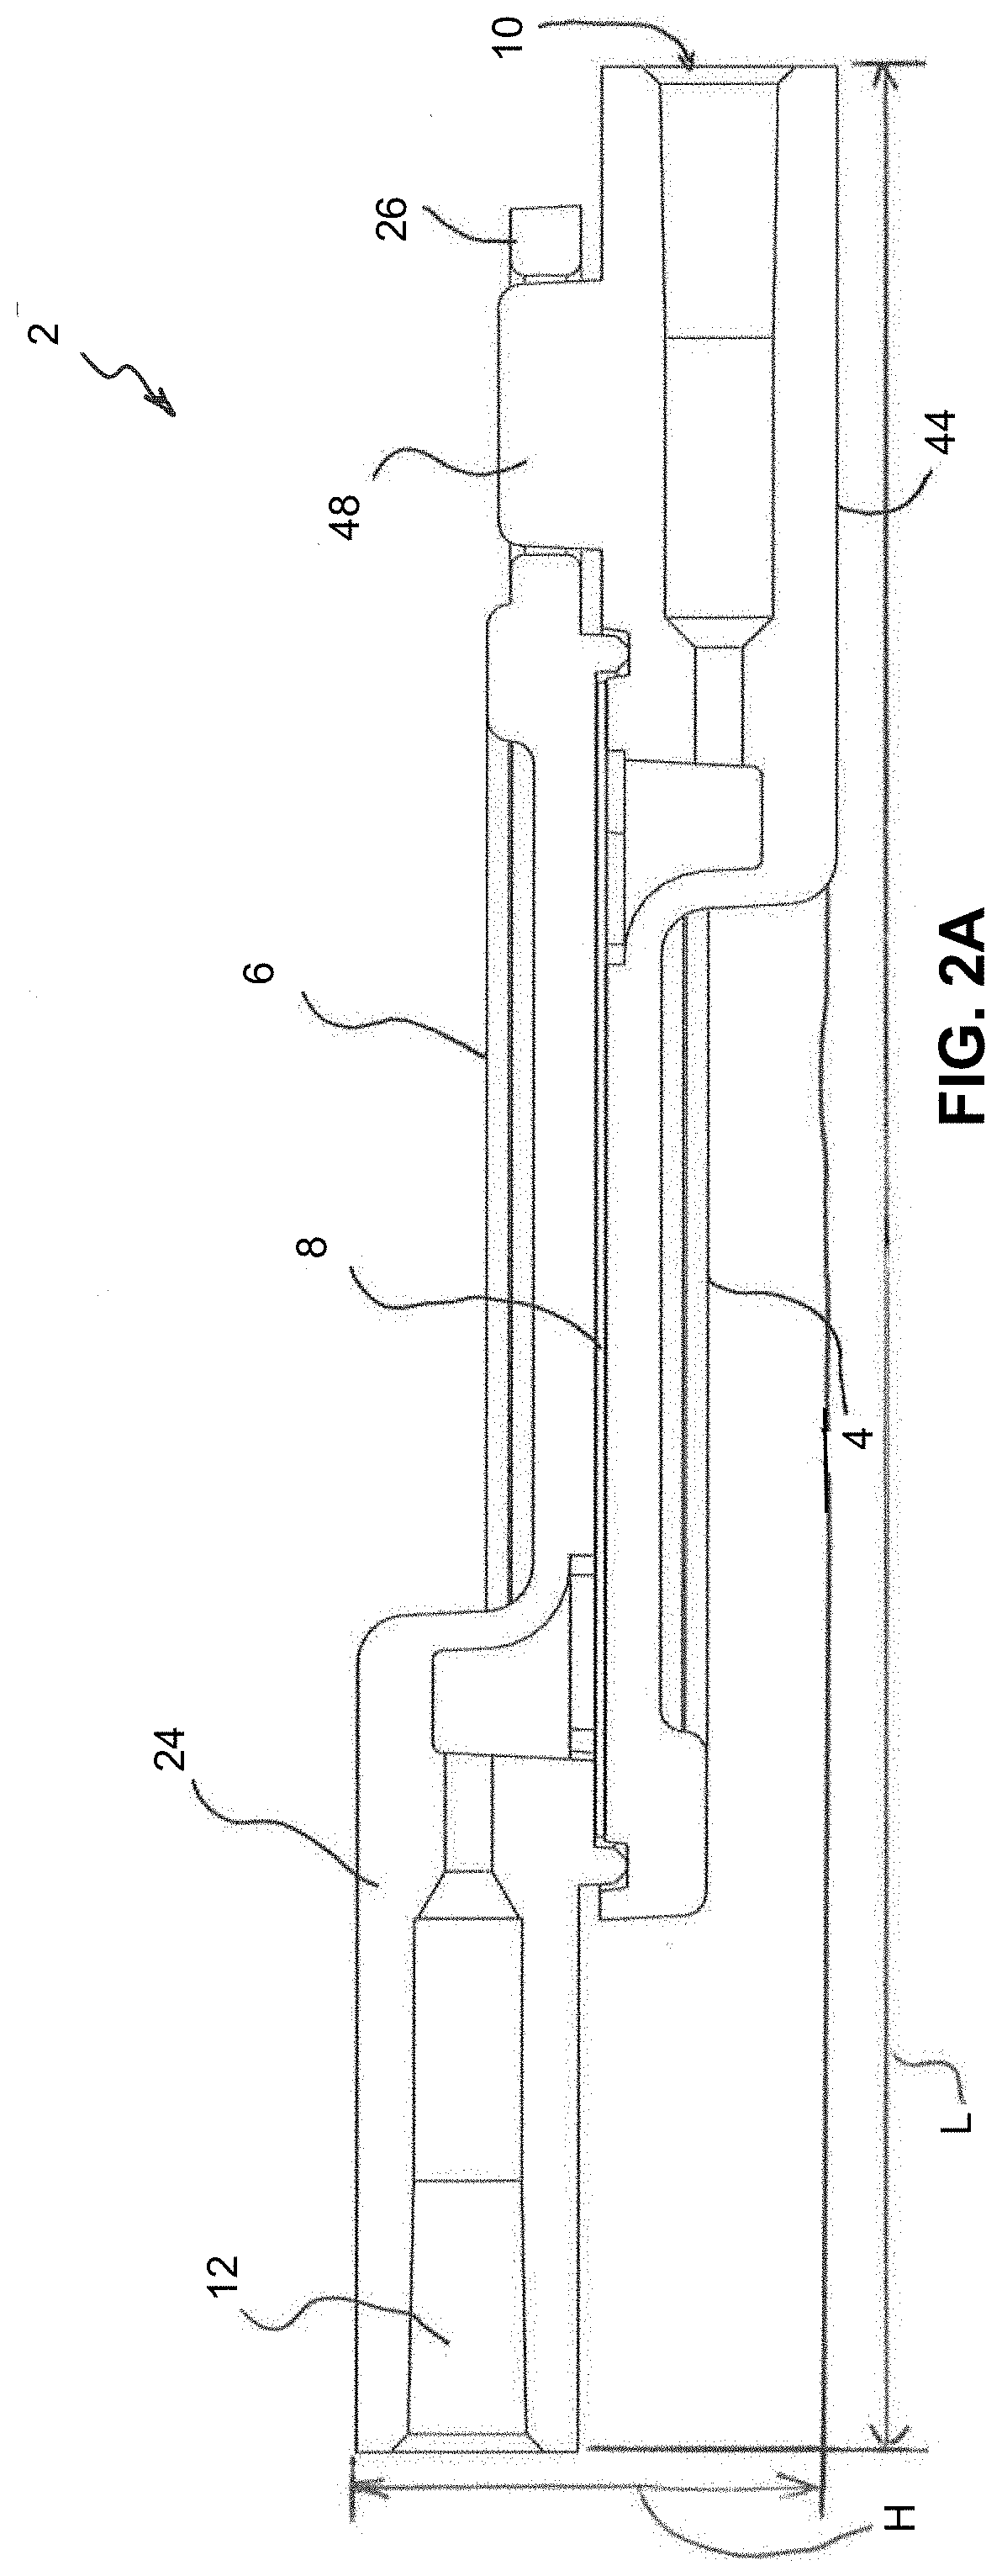 Hydrophobic gas permeable filter assembly for microfiltration of exhaled gases